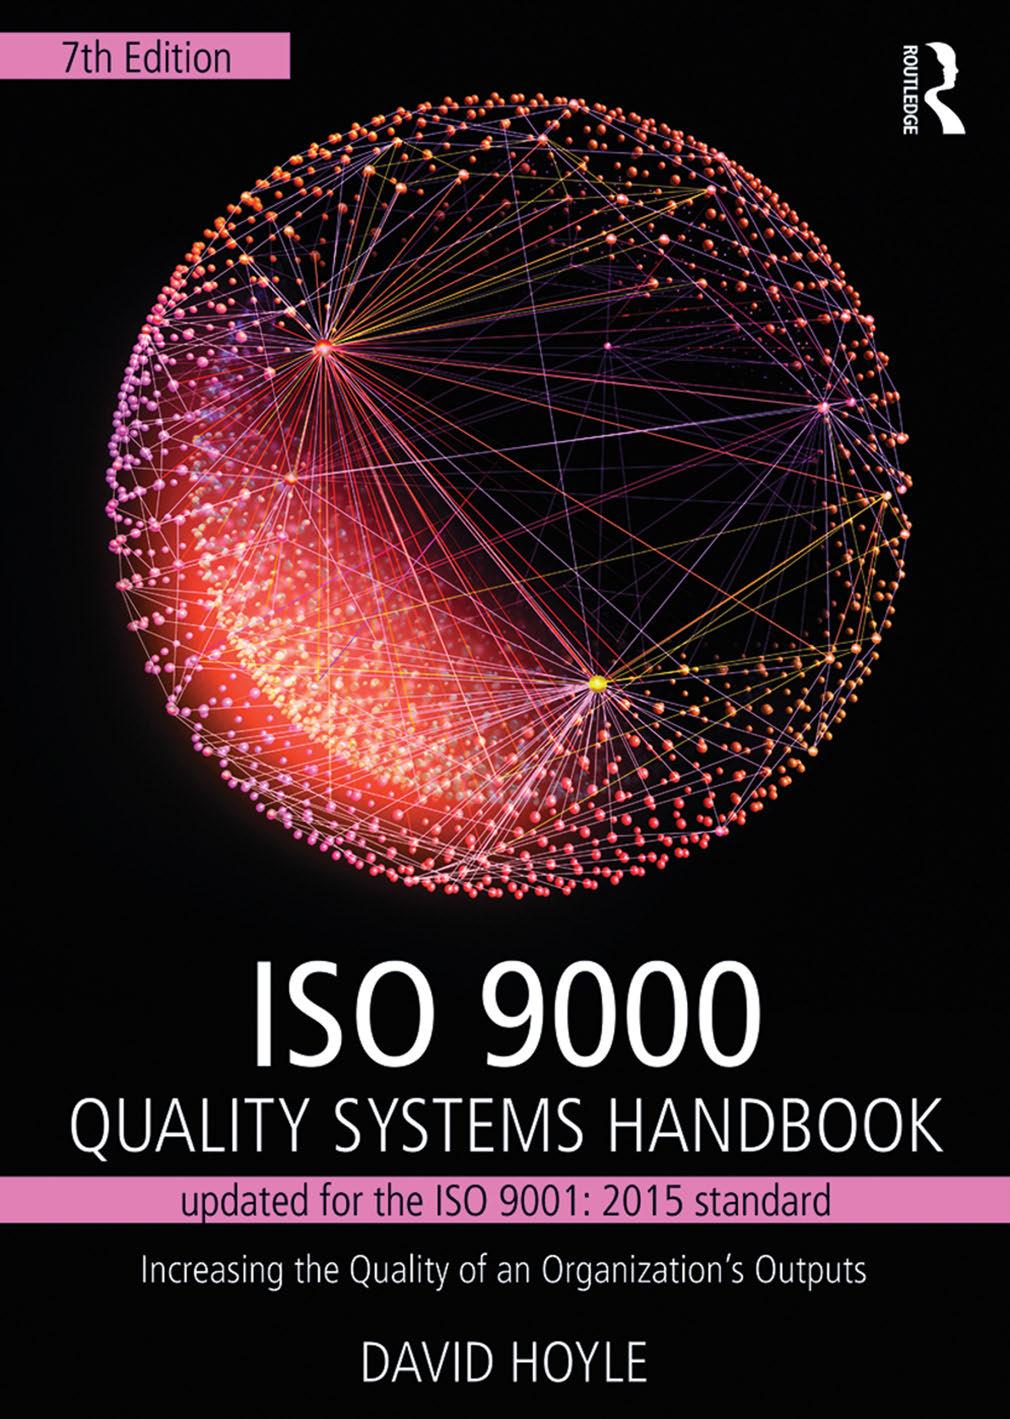 ISO 9000 Quality Systems Handbook: Increasing the Quality of an Organization’s Outputs